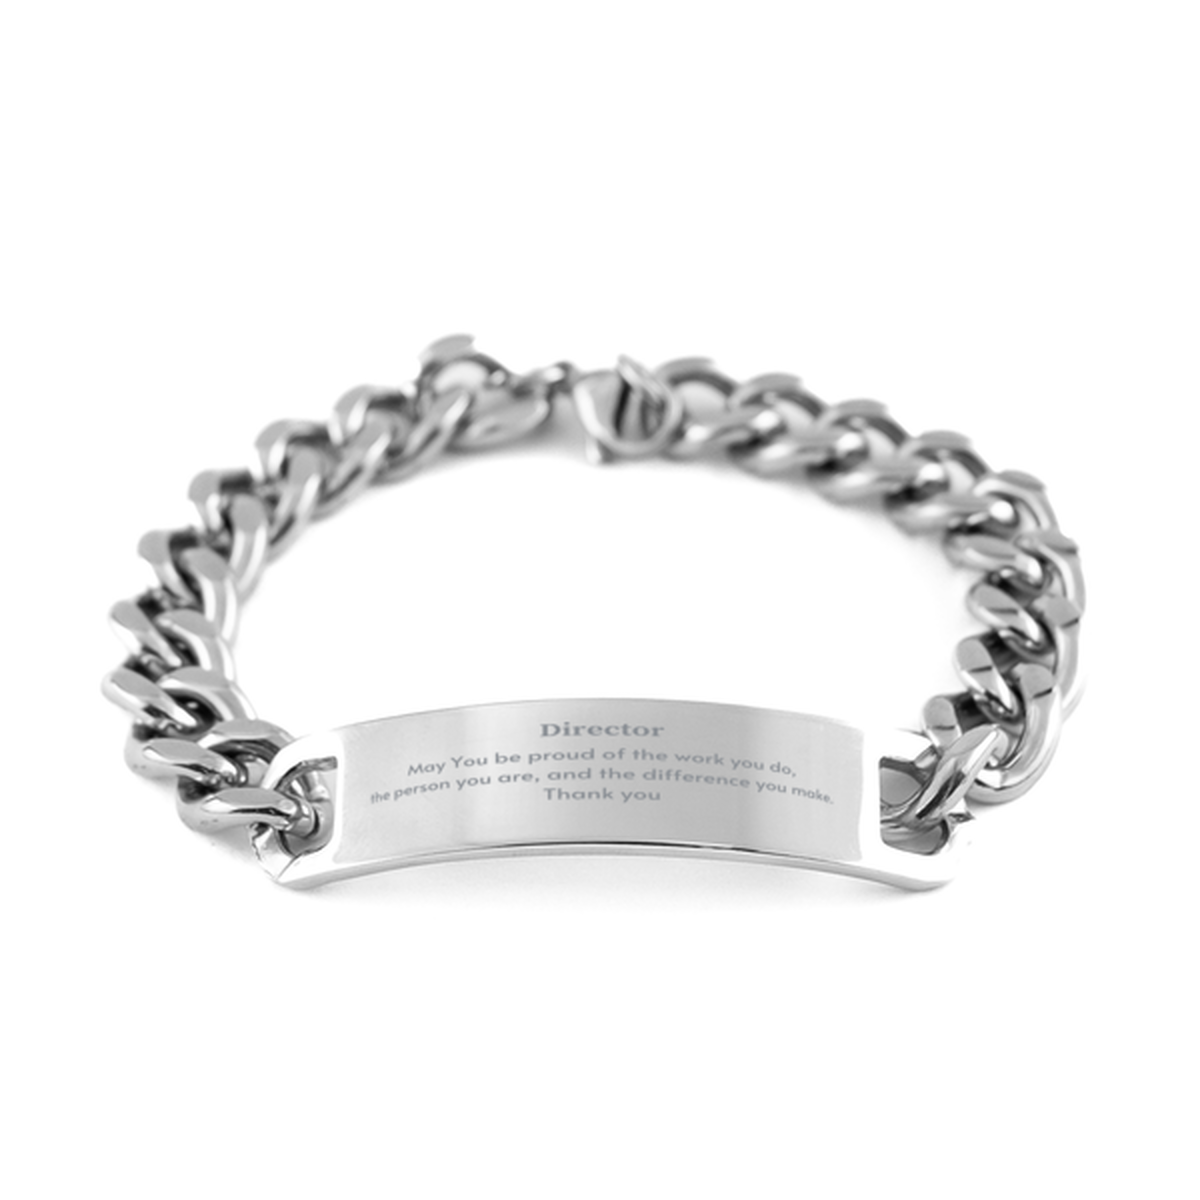 Heartwarming Cuban Chain Stainless Steel Bracelet Retirement Coworkers Gifts for Director, Director May You be proud of the work you do, the person you are Gifts for Boss Men Women Friends